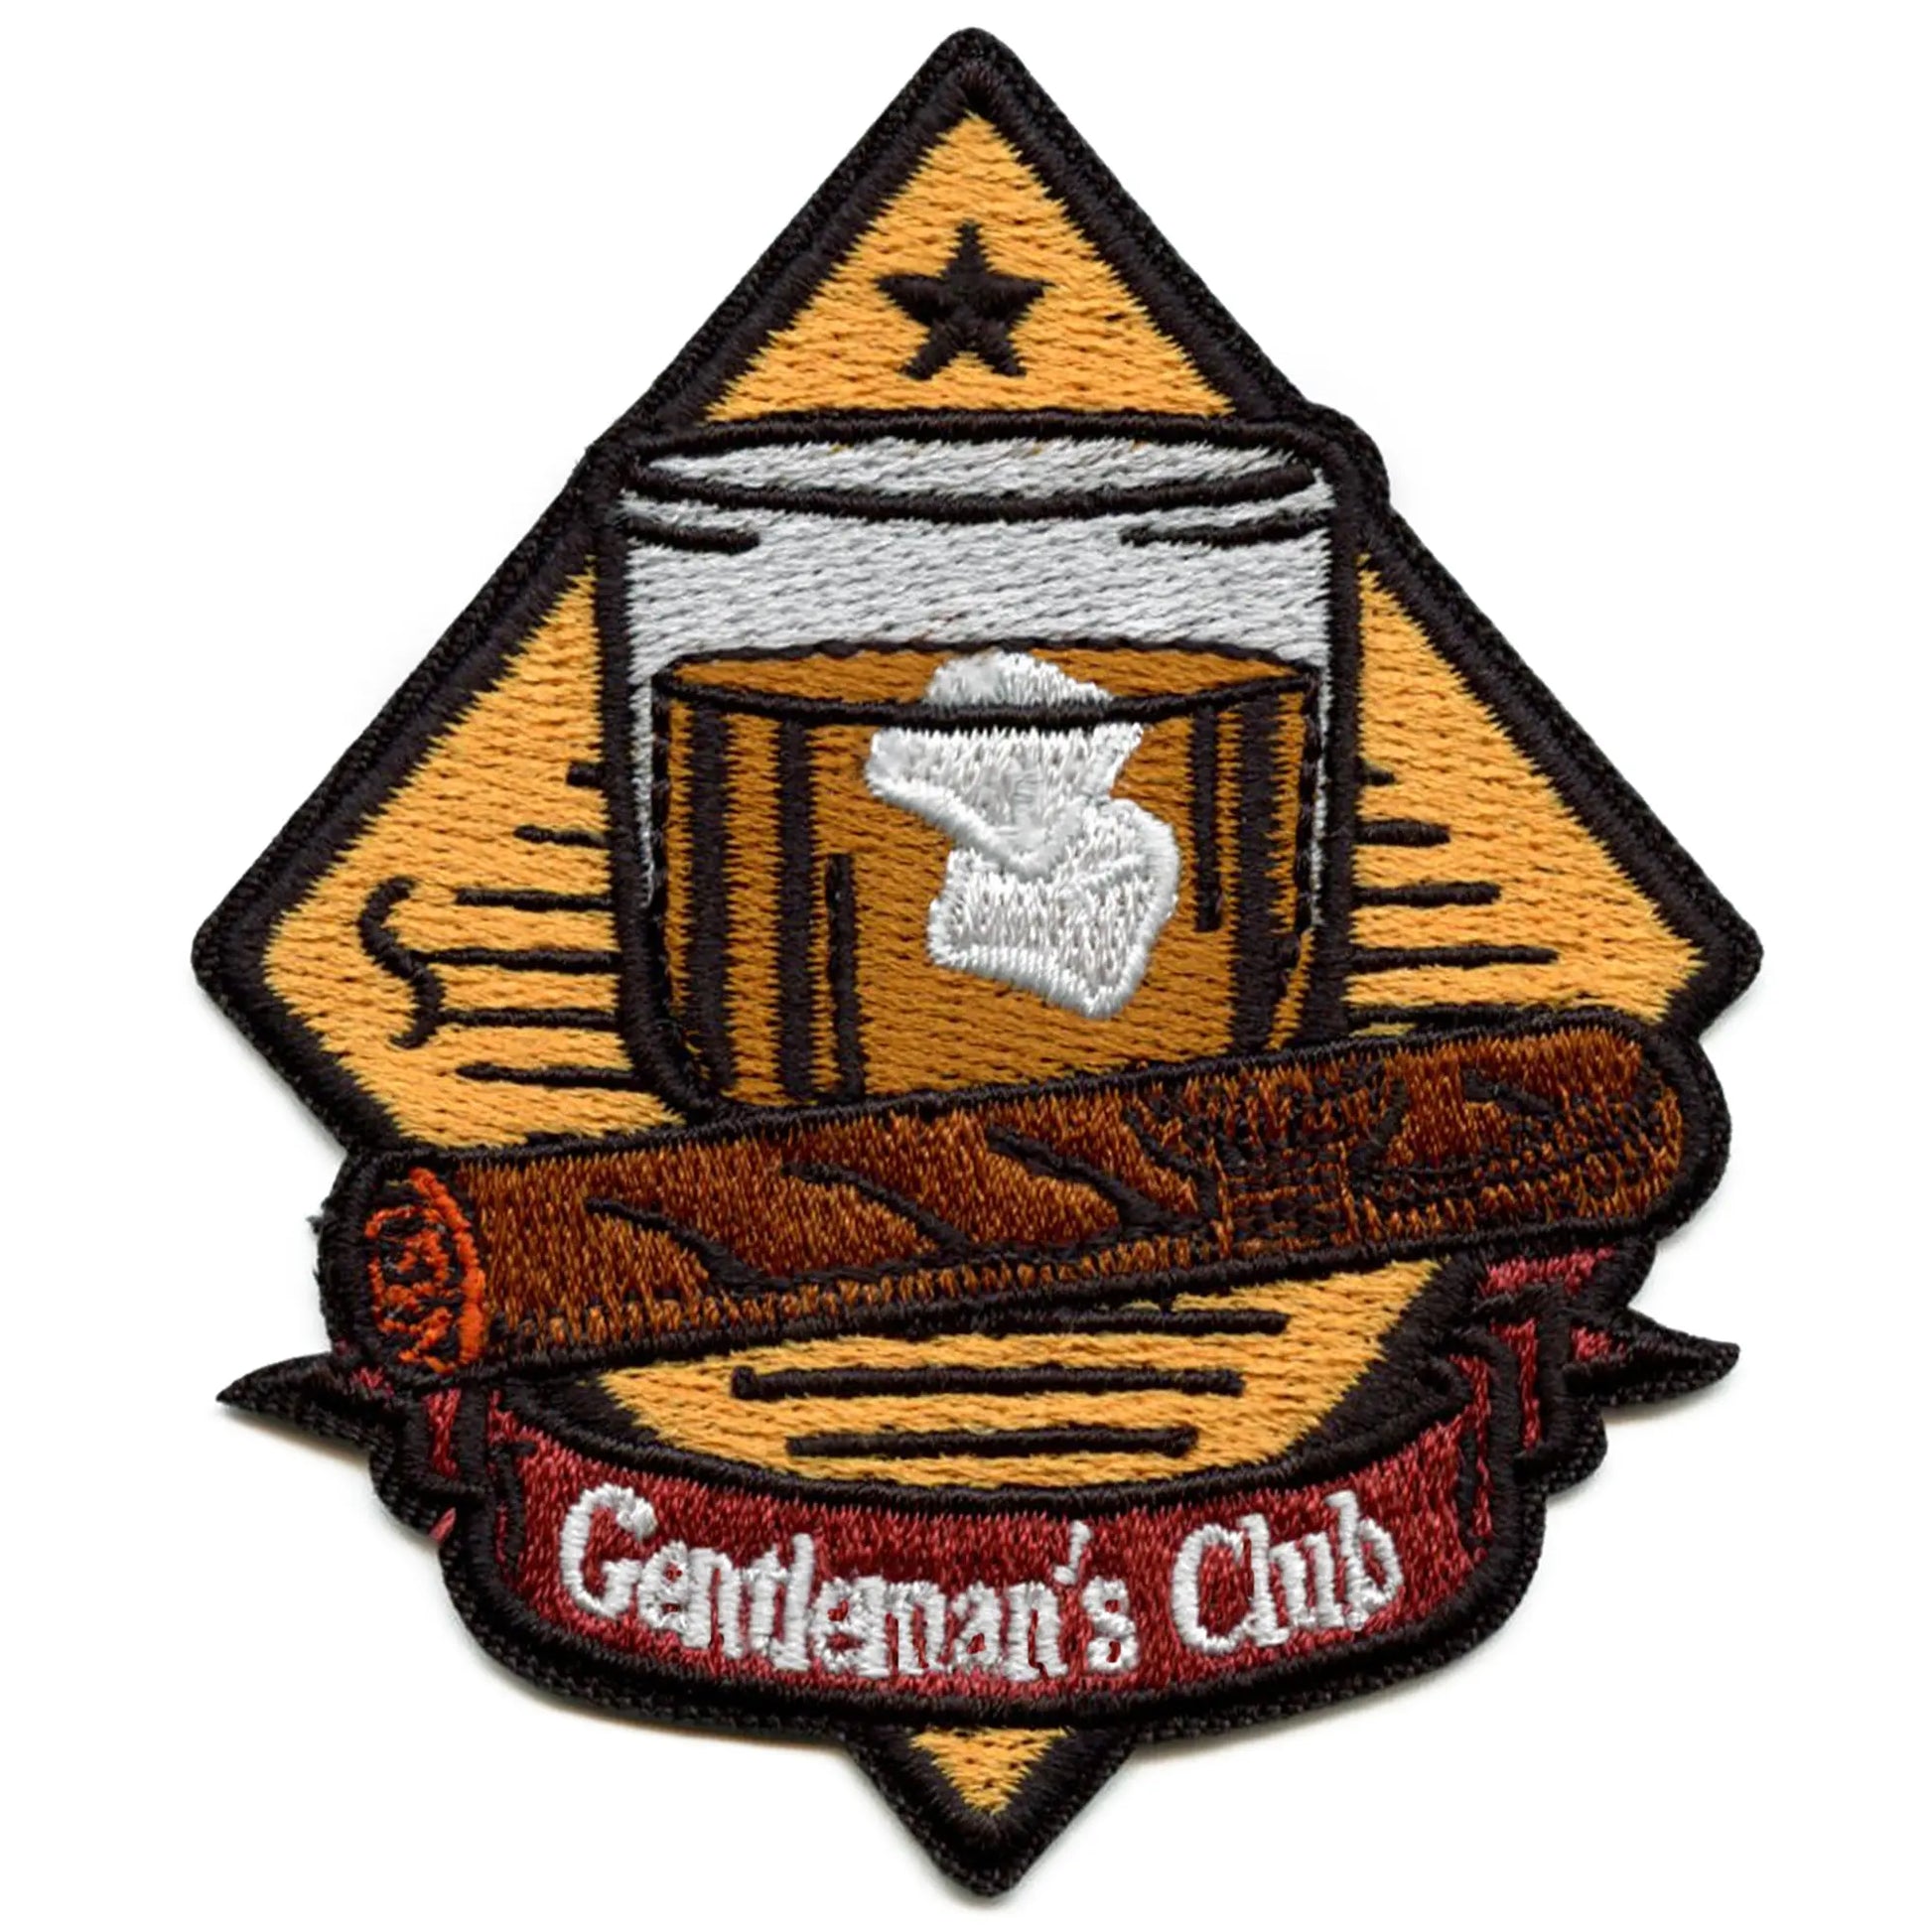 Cigar And Whiskey Gentleman's Club Patch Dinks Smoke Embroidered Iron On Patch